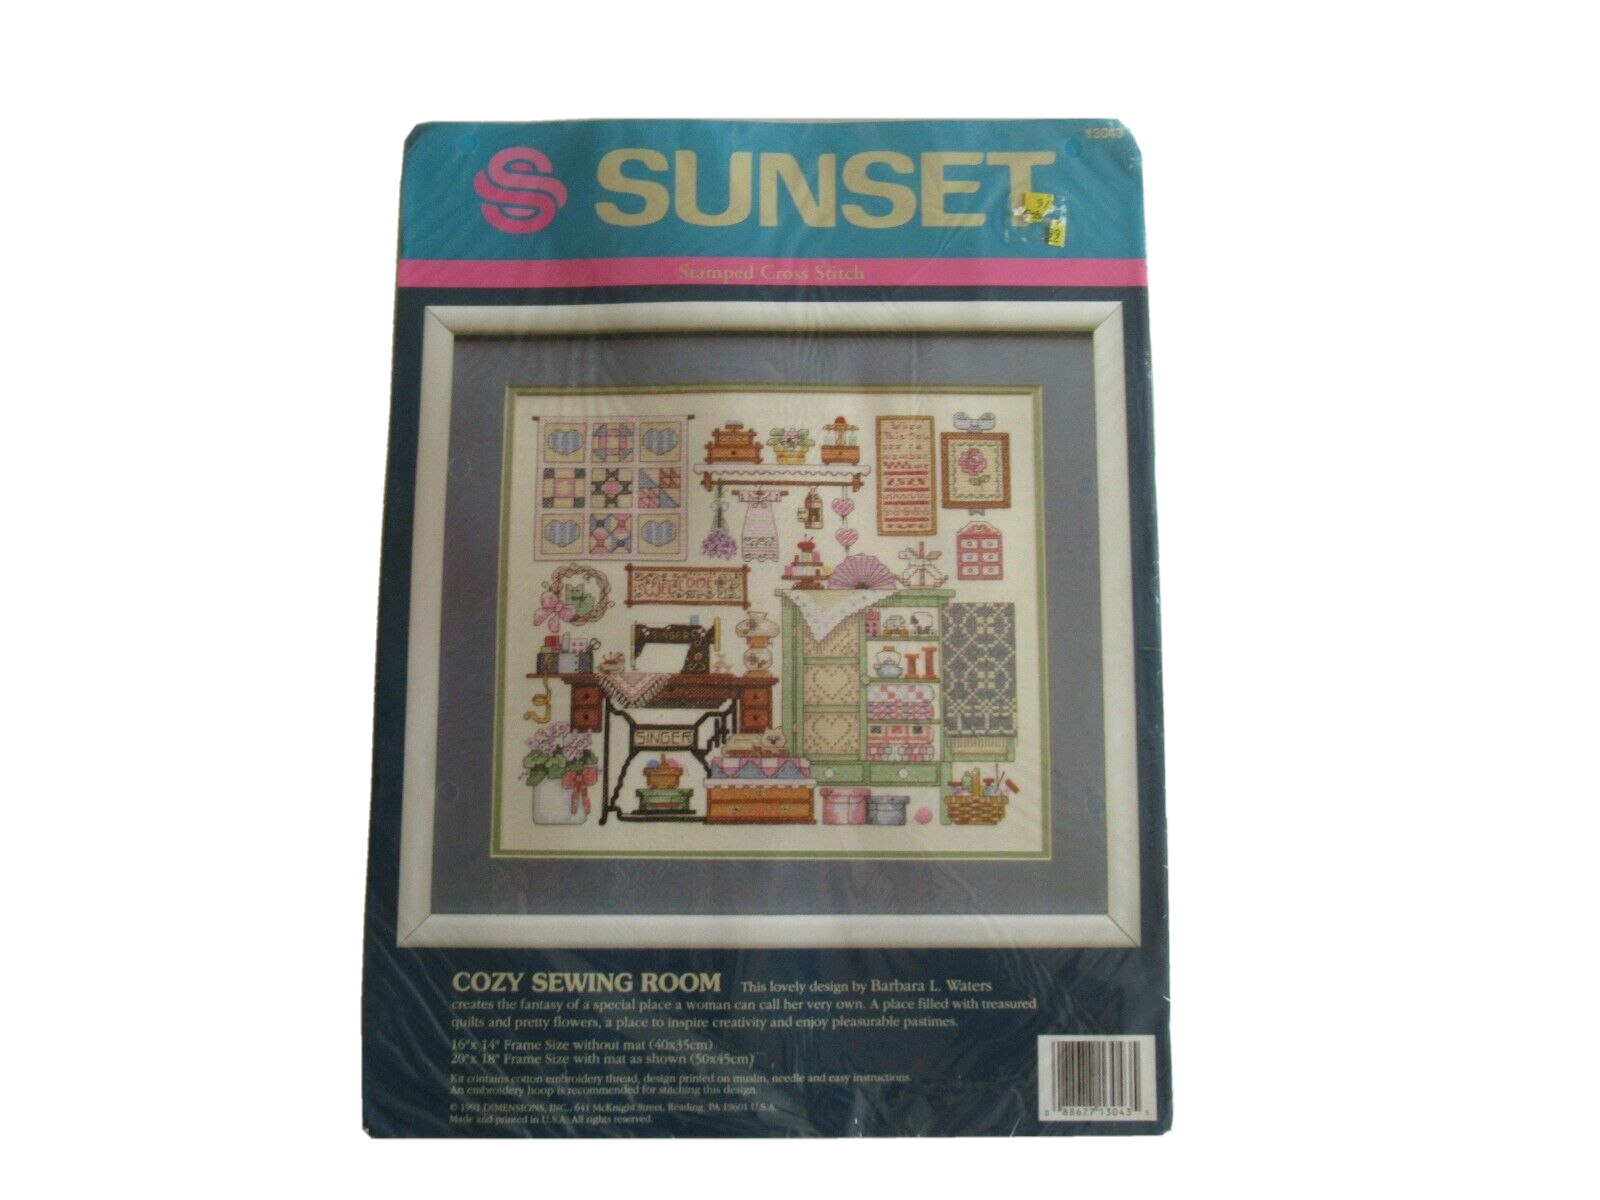 Vtg Sunset Stamped Cross Stitch Kit Dimensions 1991 Cozy Sewing Room B. Waters - $20.00